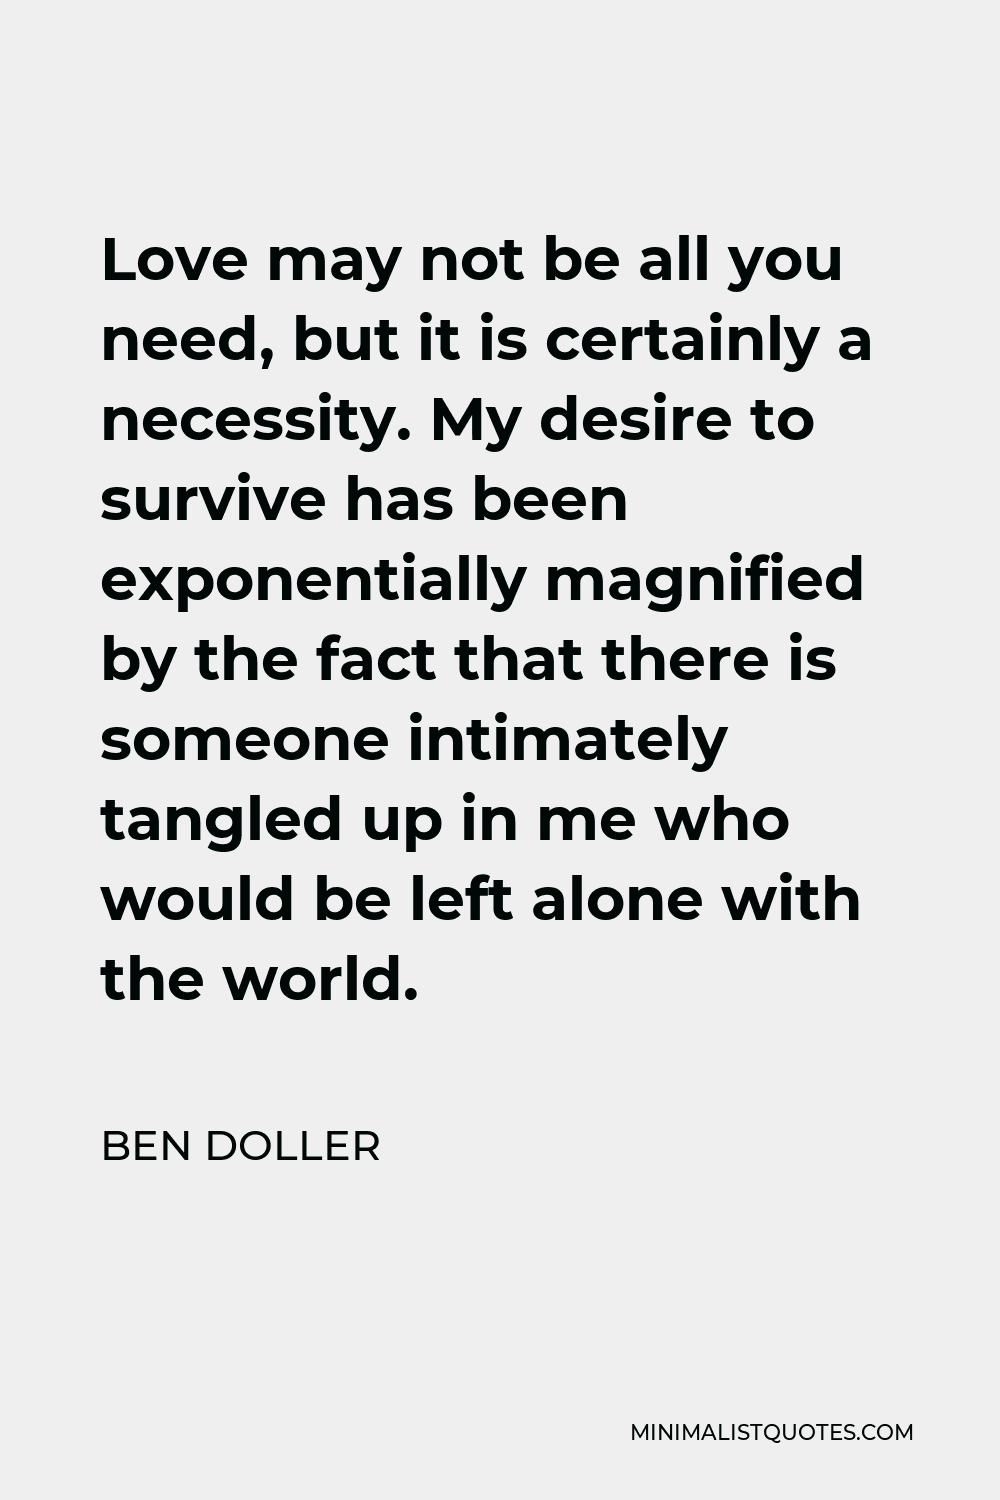 Ben Doller Quote - Love may not be all you need, but it is certainly a necessity. My desire to survive has been exponentially magnified by the fact that there is someone intimately tangled up in me who would be left alone with the world.